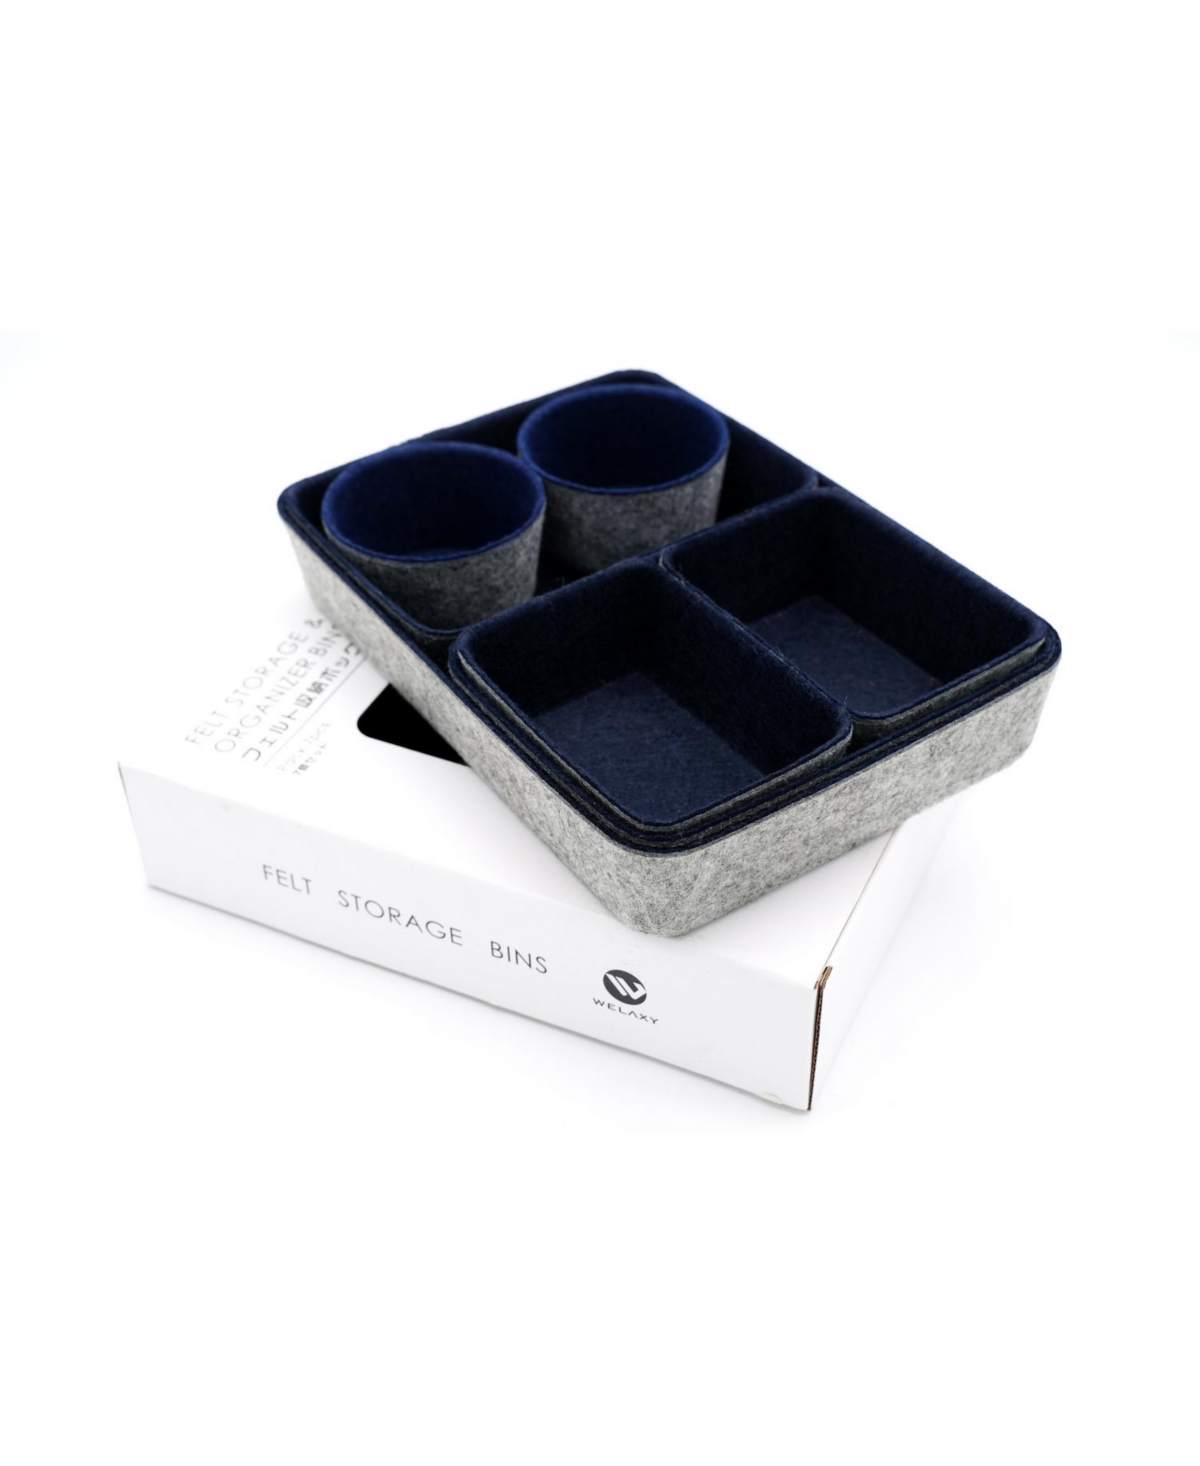 Welaxy 7 Piece Felt Drawer Organizer Set With Round Cups And Trays In Navy